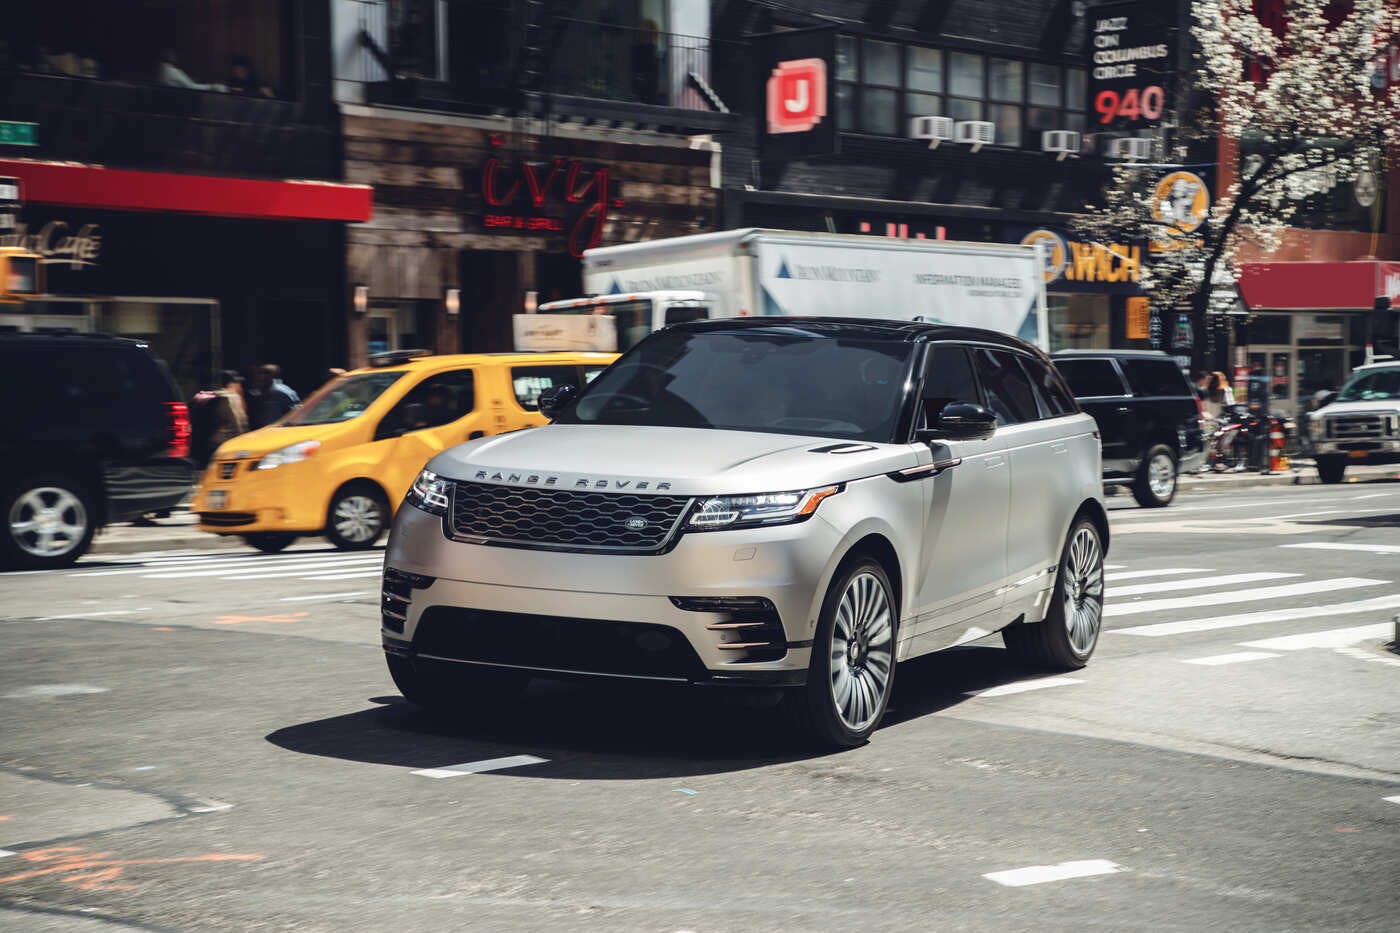 2020 Land Rover Range Rover Velar Reviews Pricing Pictures Truecar